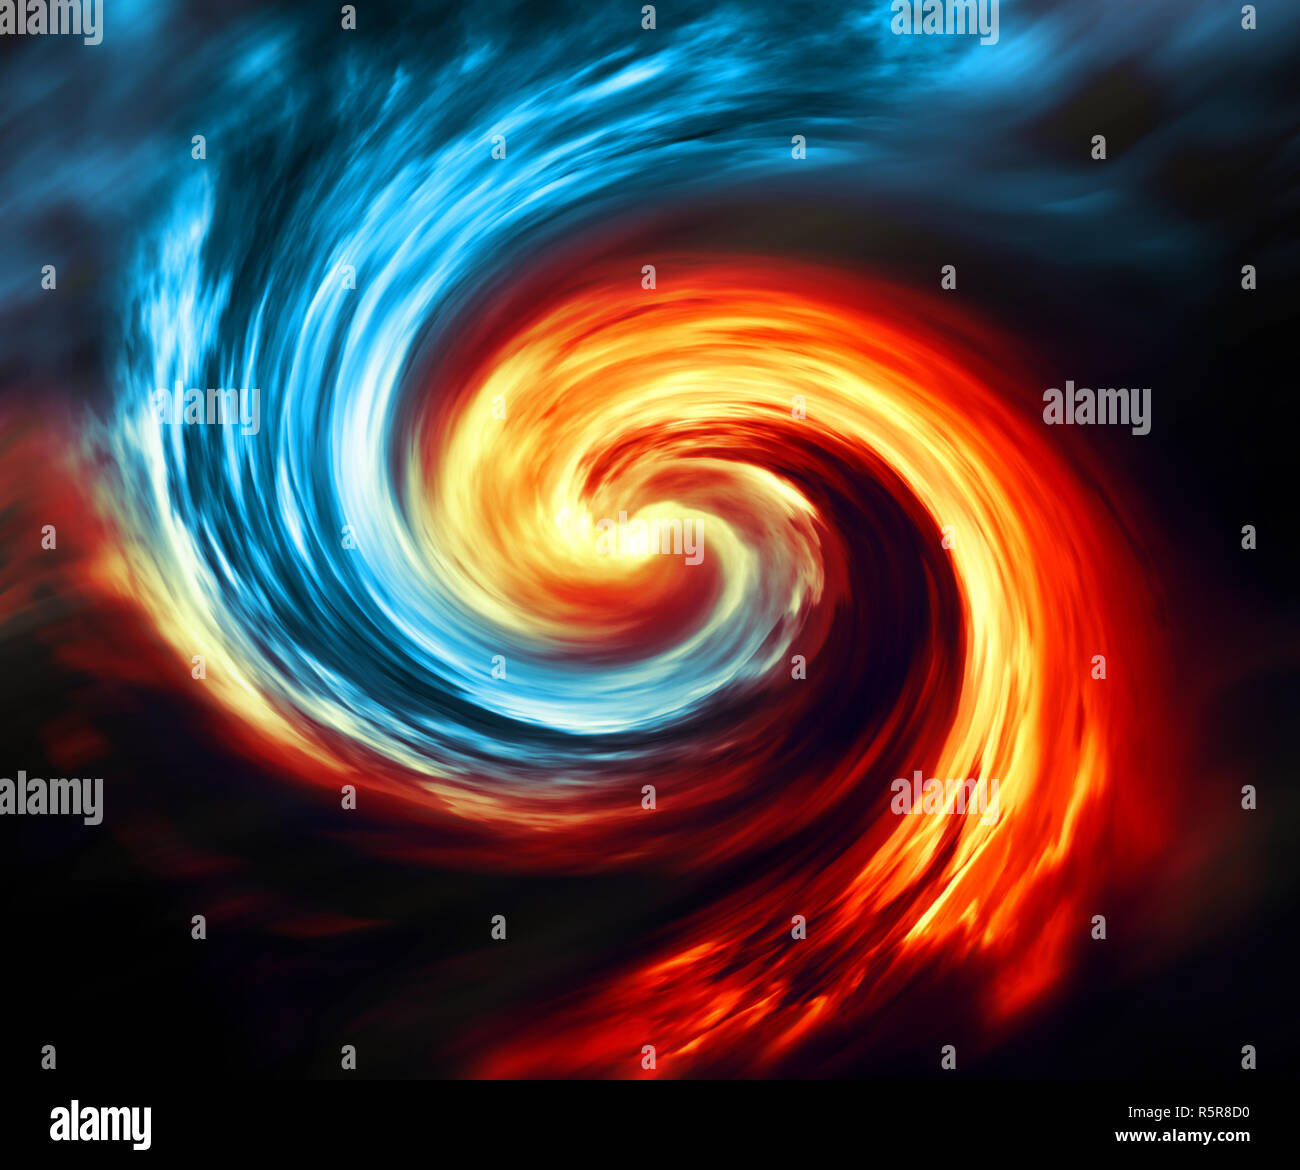 Fire And Ice Abstract Background Red And Blue Smoke Swirl On Dark Background Stock Photo Alamy